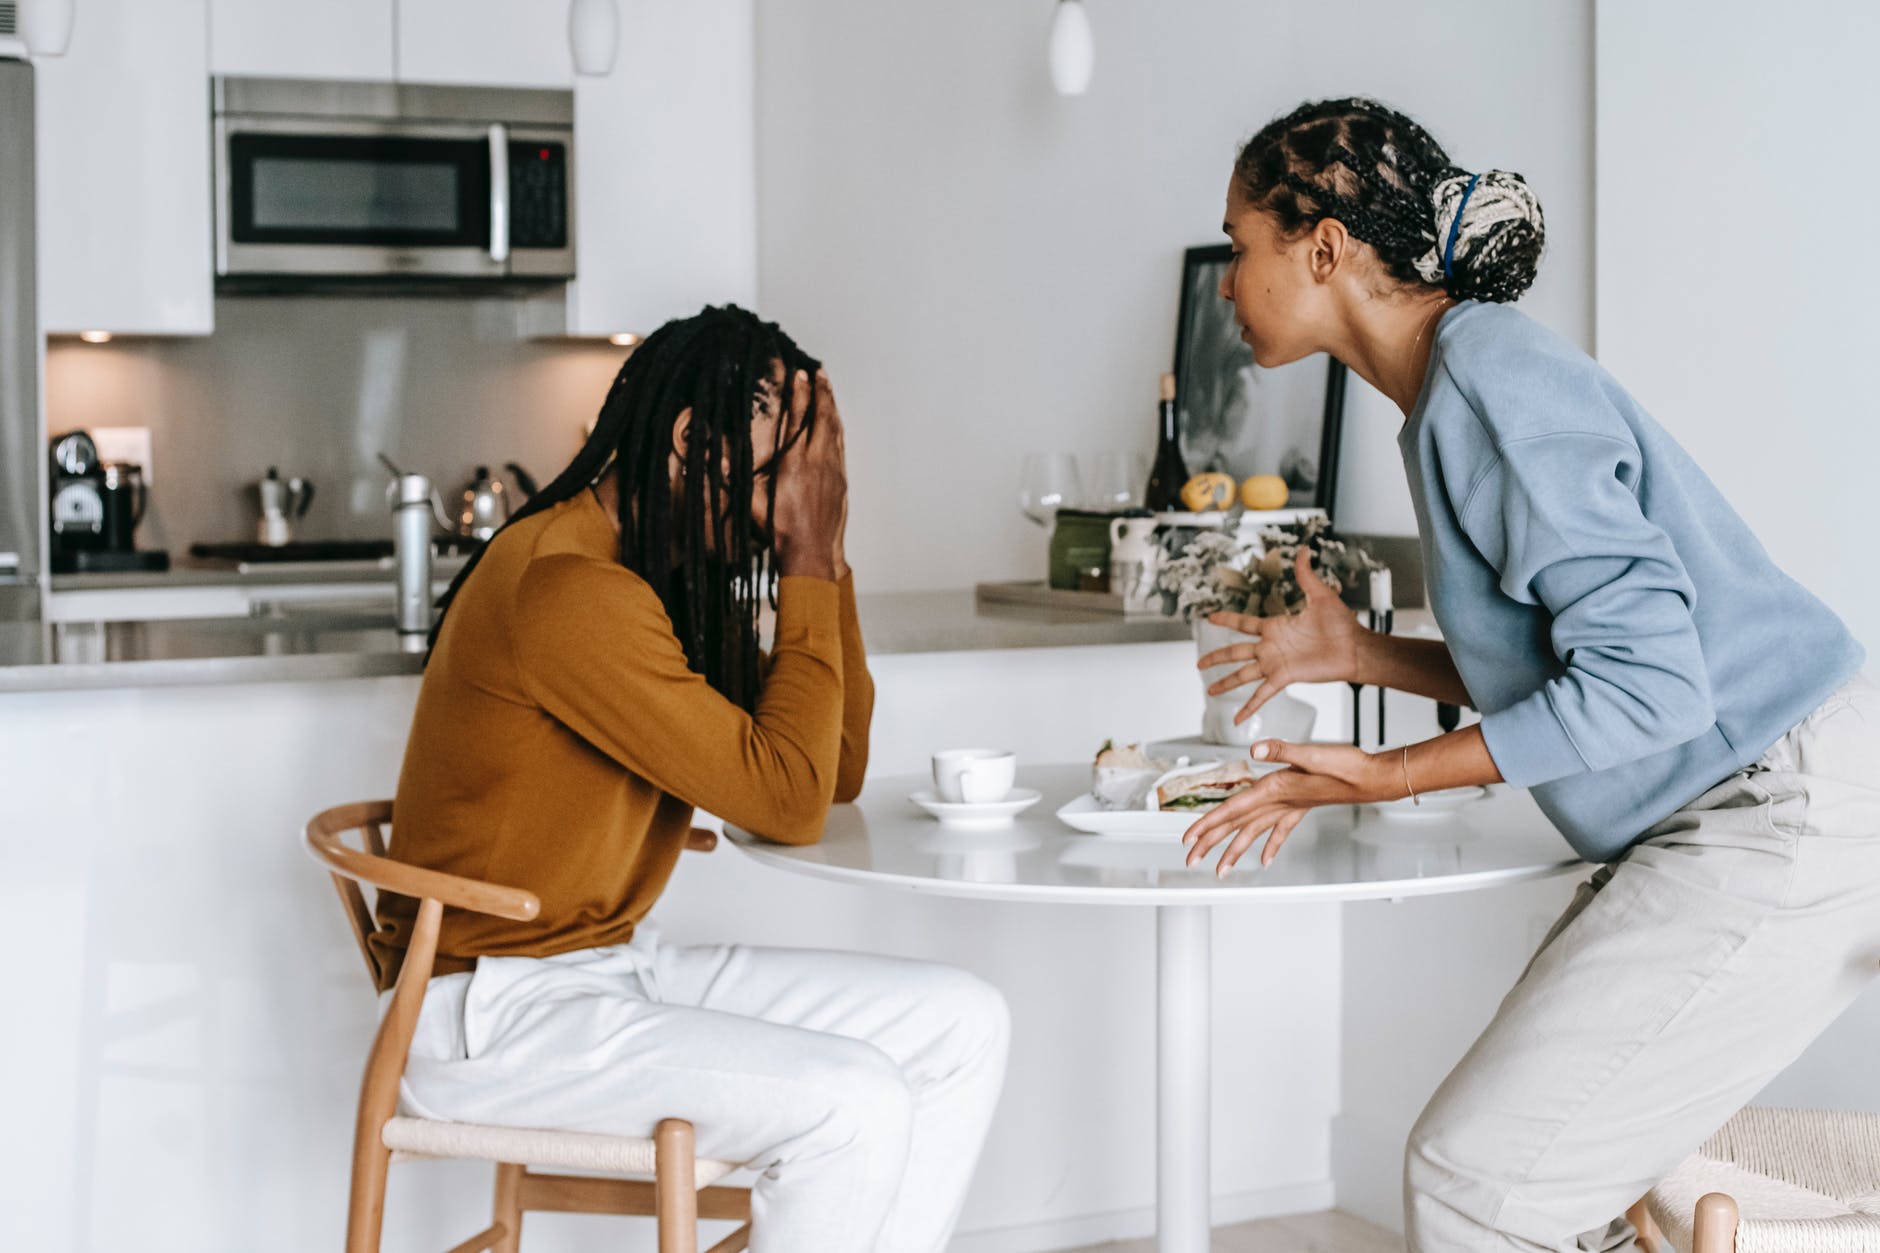 A couple arguing in the kitchen | Source: Pexels